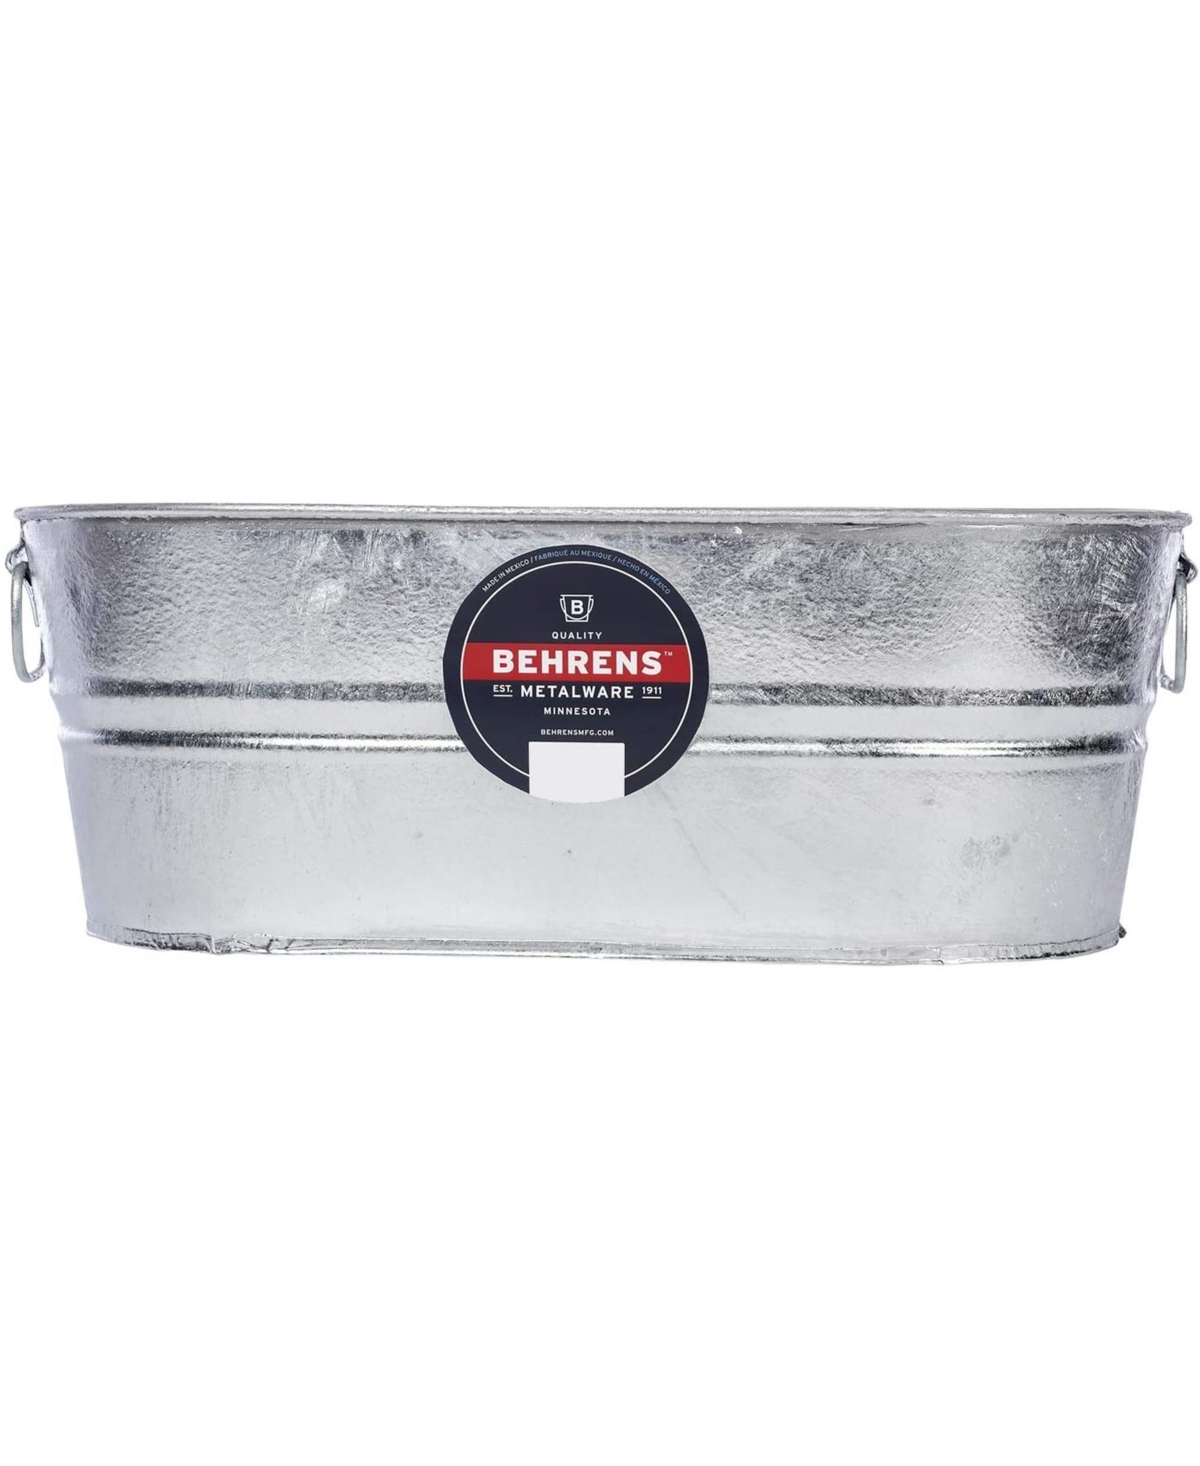 Hot Dipped Galvanized Steel Oval Planter/Tub 5.5 gal Silver - Silver